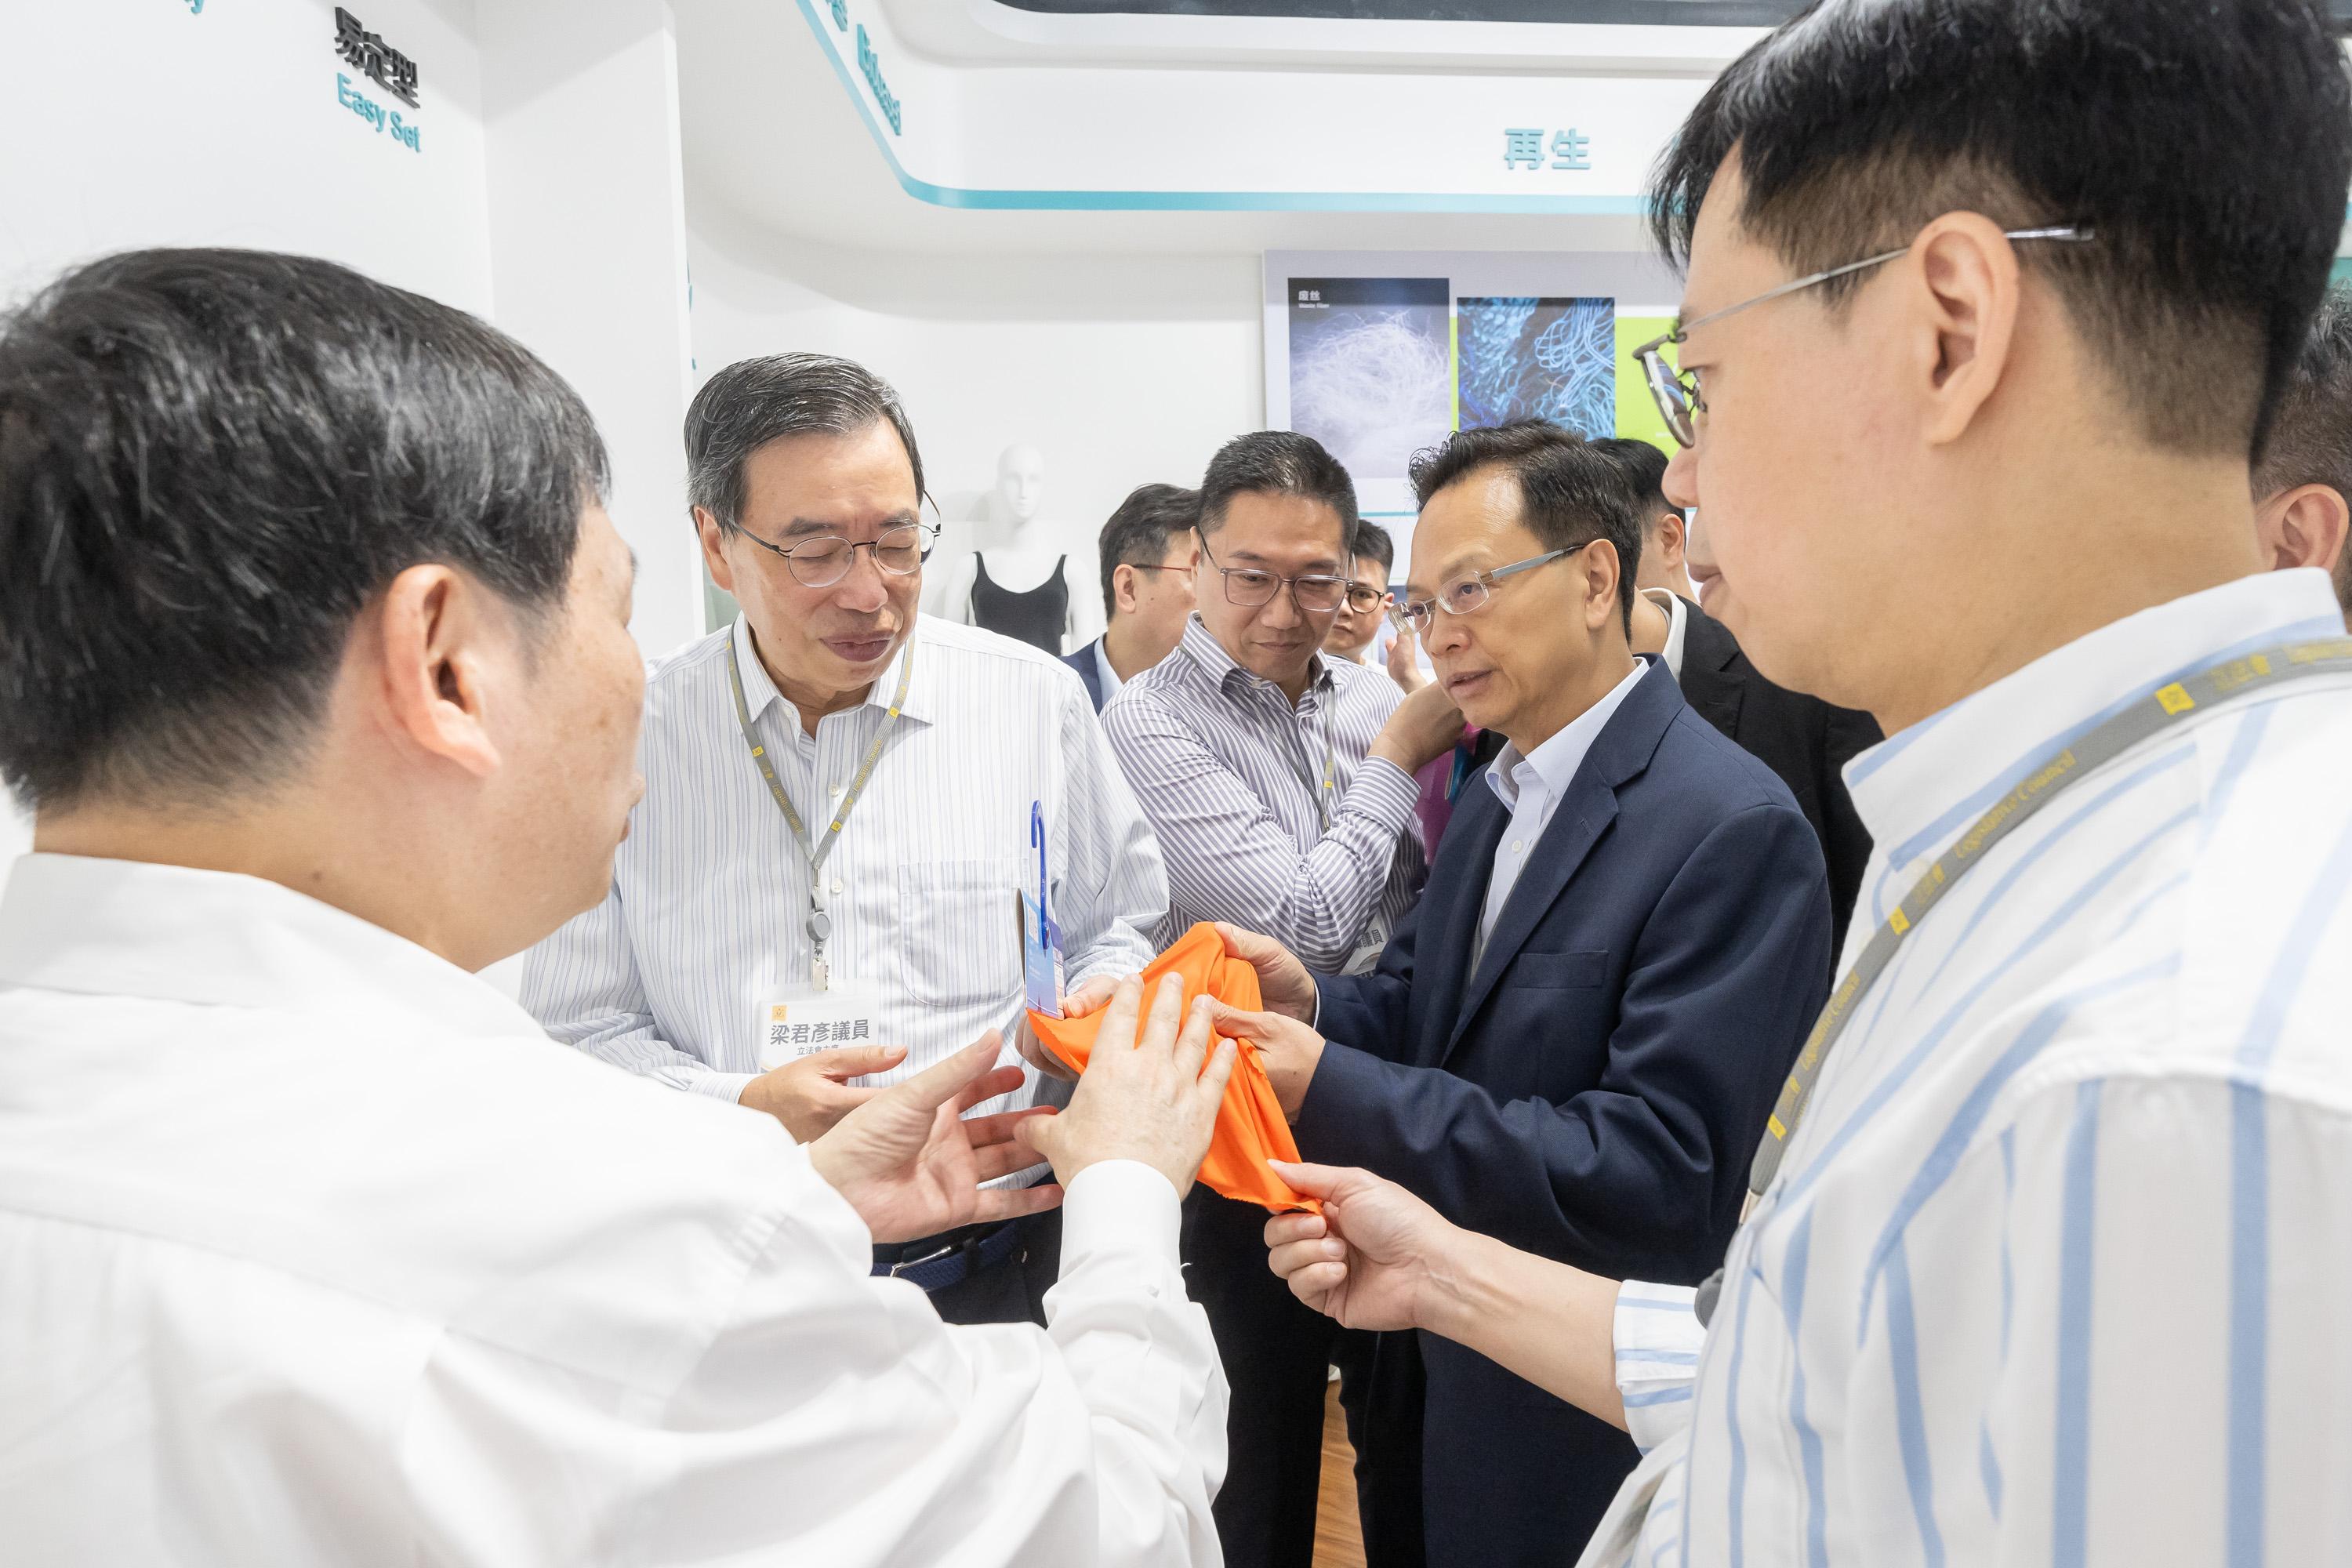 The Legislative Council (LegCo) delegation begins the five-day study visit in Fujian province today (July 15). Photo shows the delegation visits Highsun Synthetic Fiber Technology Co. Ltd.